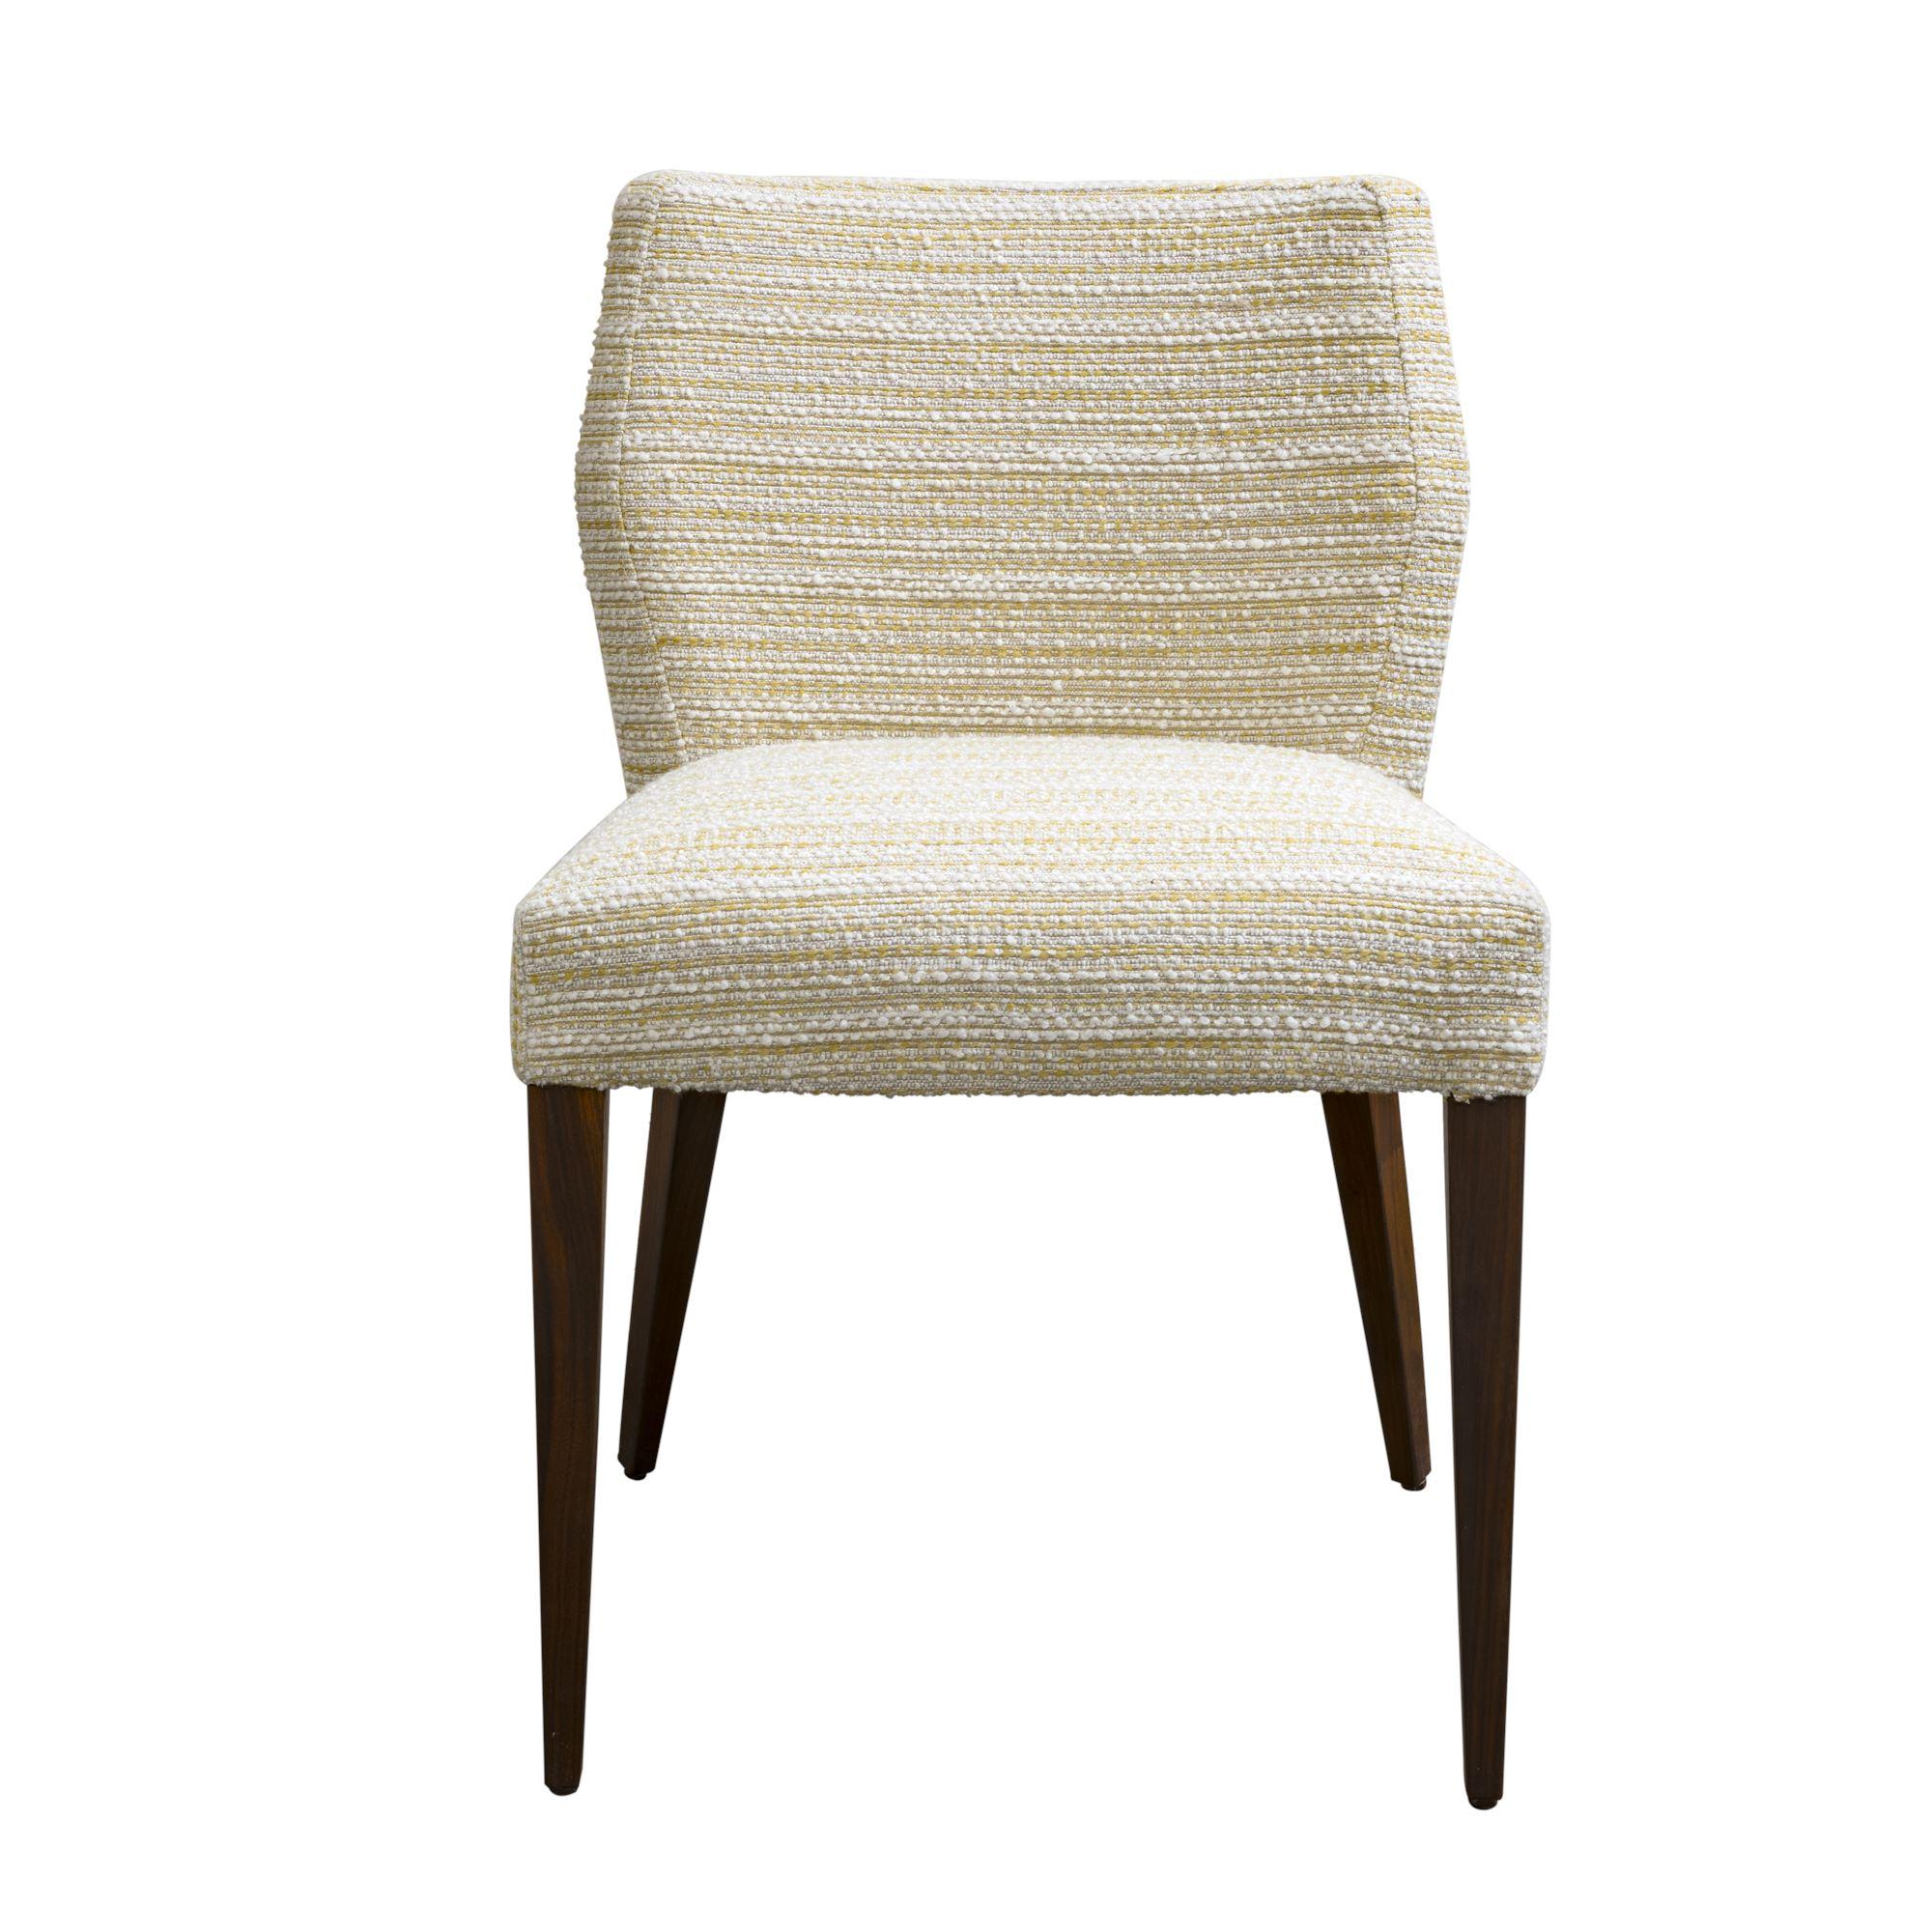 Wood Katy Dining Chair For Sale